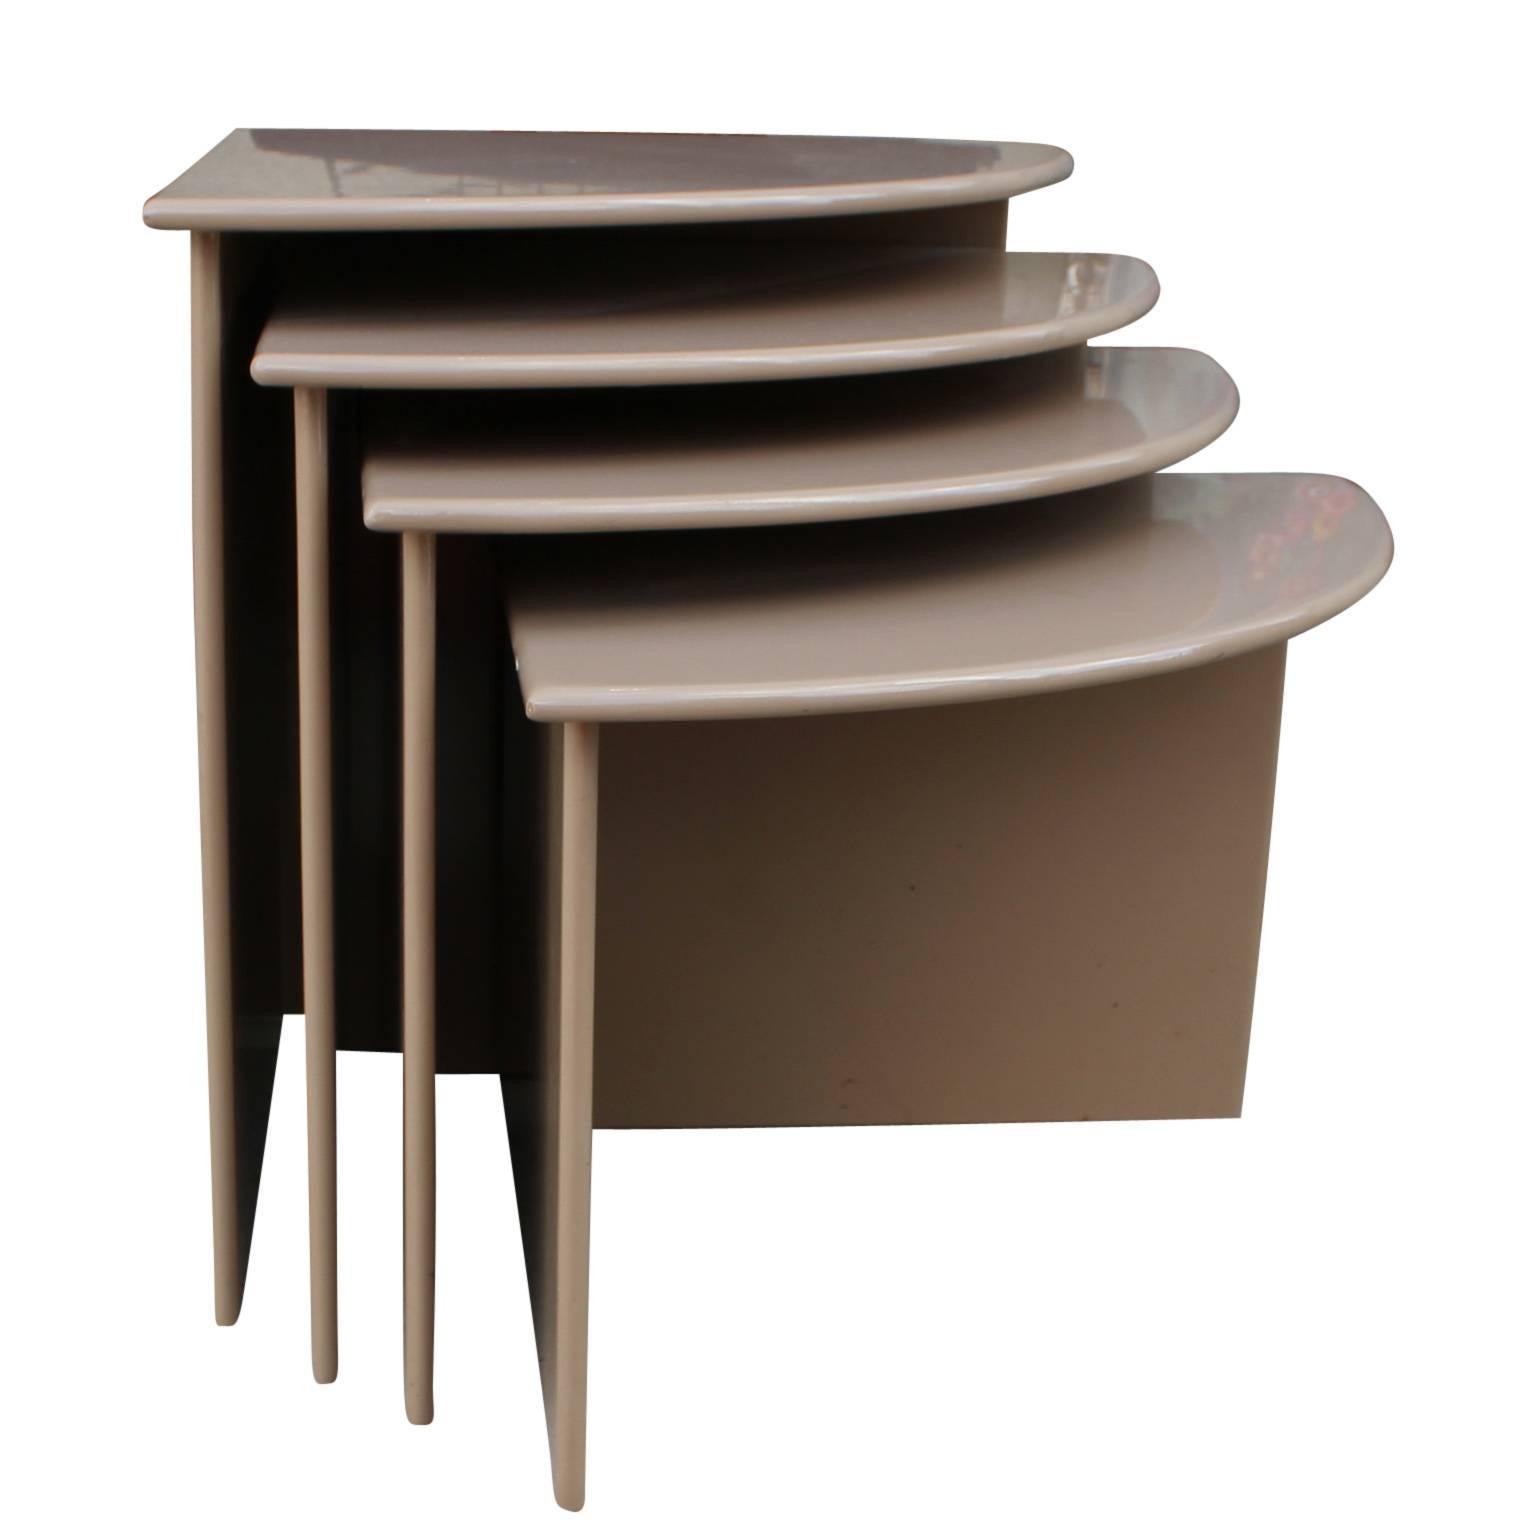 American Set of Four Nude Modern Lacquer Nesting / Stacking Tables